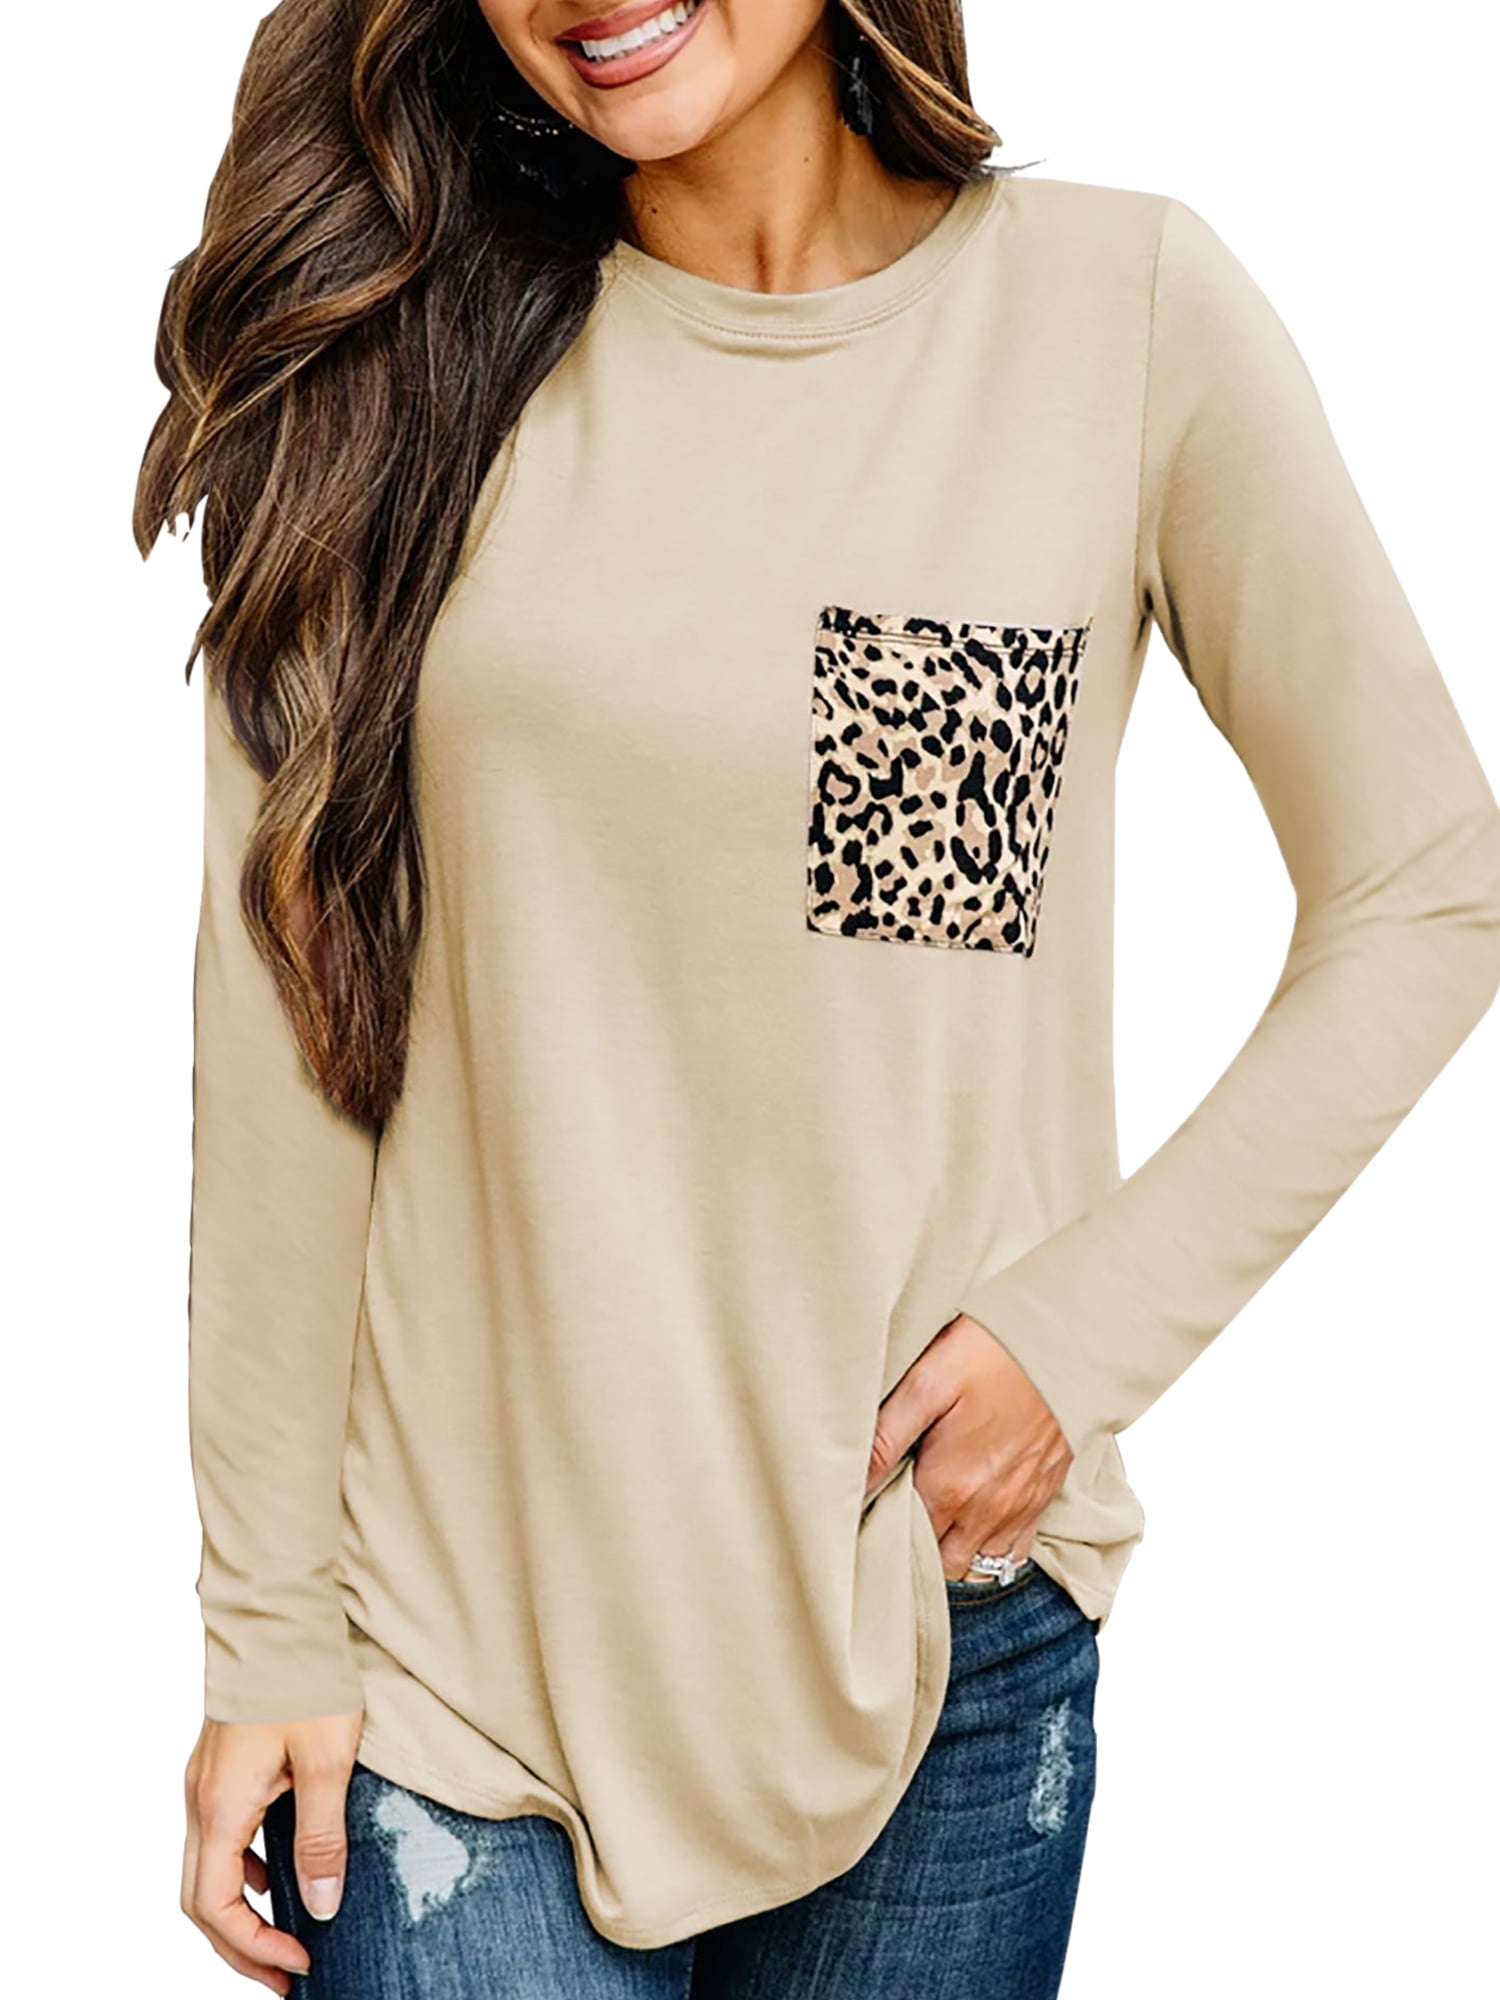 Womens Leopard Blouse Ladies Casual Pocket Long Sleeve Tunic Jumper Shirt Tops